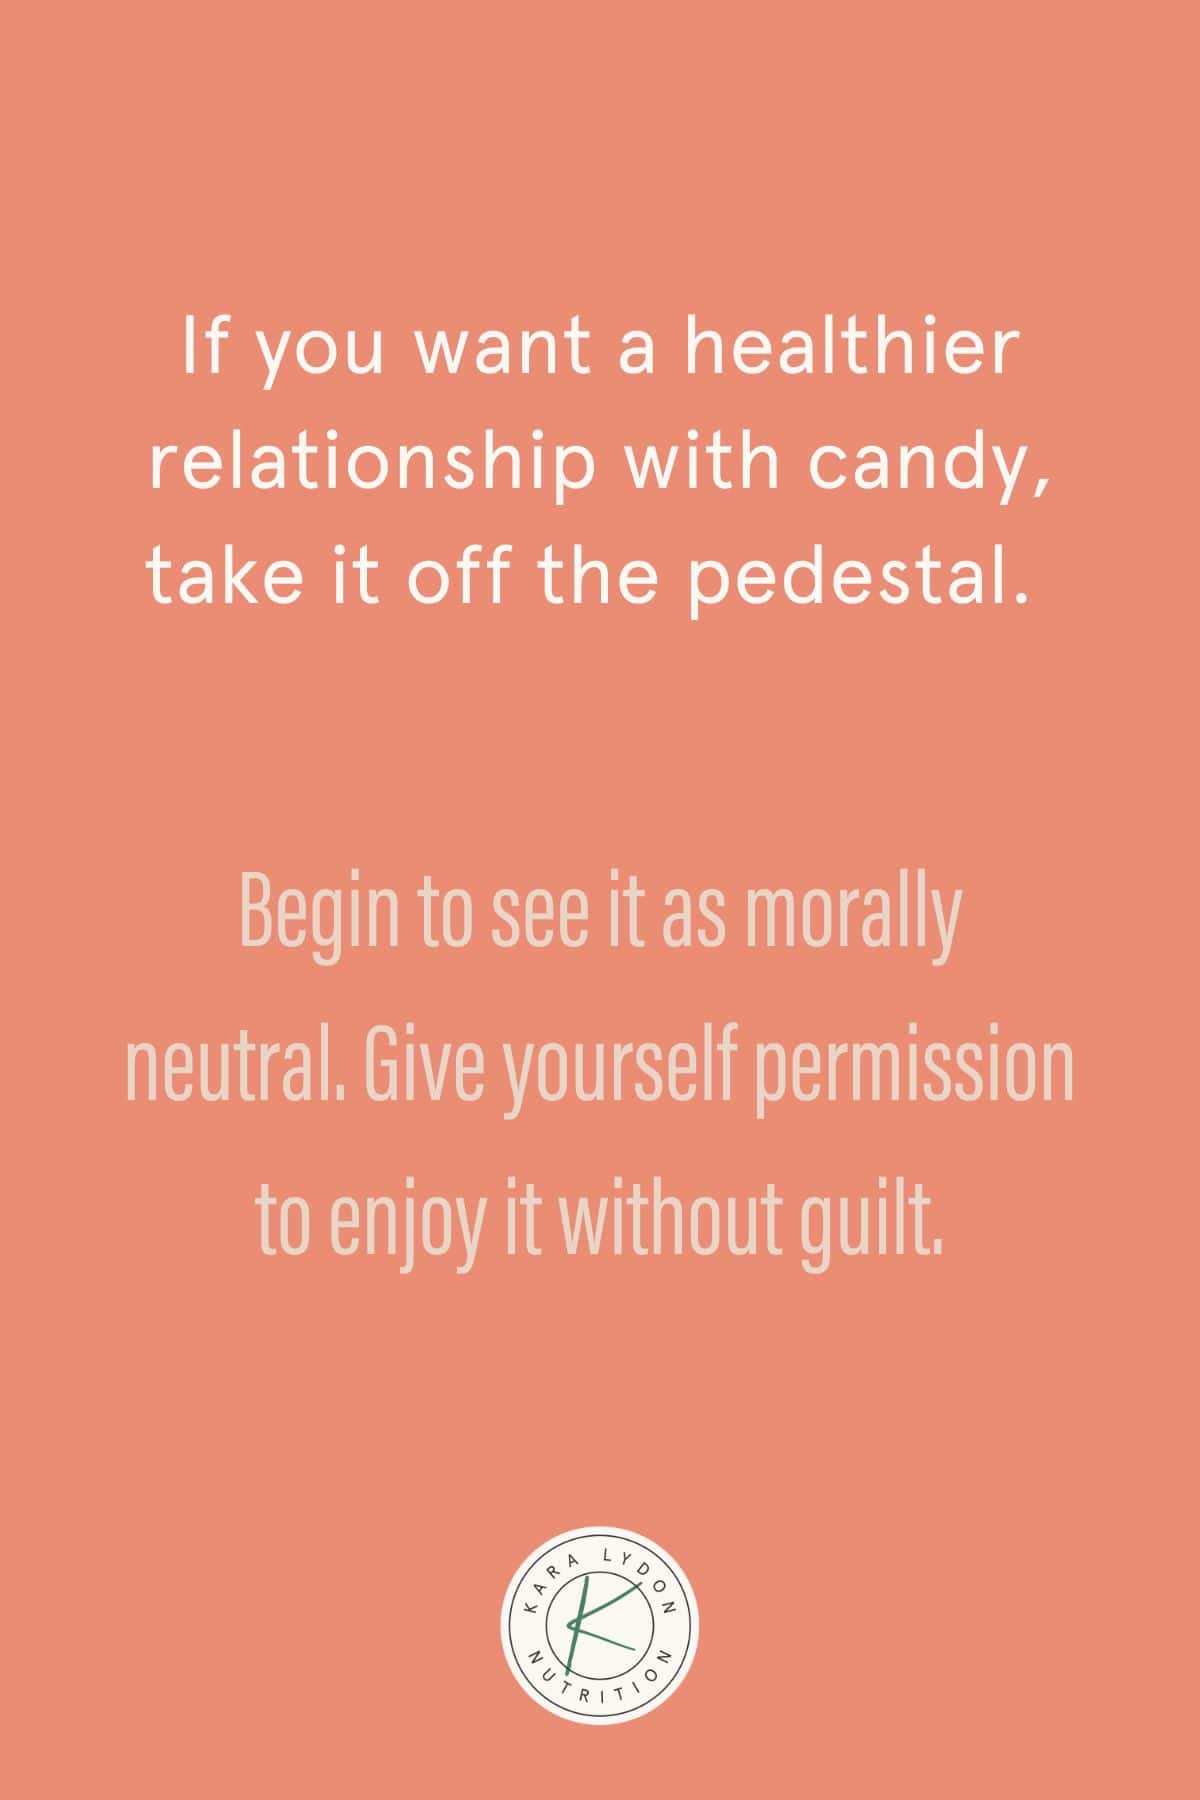 Graphic with quote: "If you want a healthier relationship with candy, take it off the pedestal. Begin to see it as morally neutral. Give yourself permission to enjoy it without guilt."